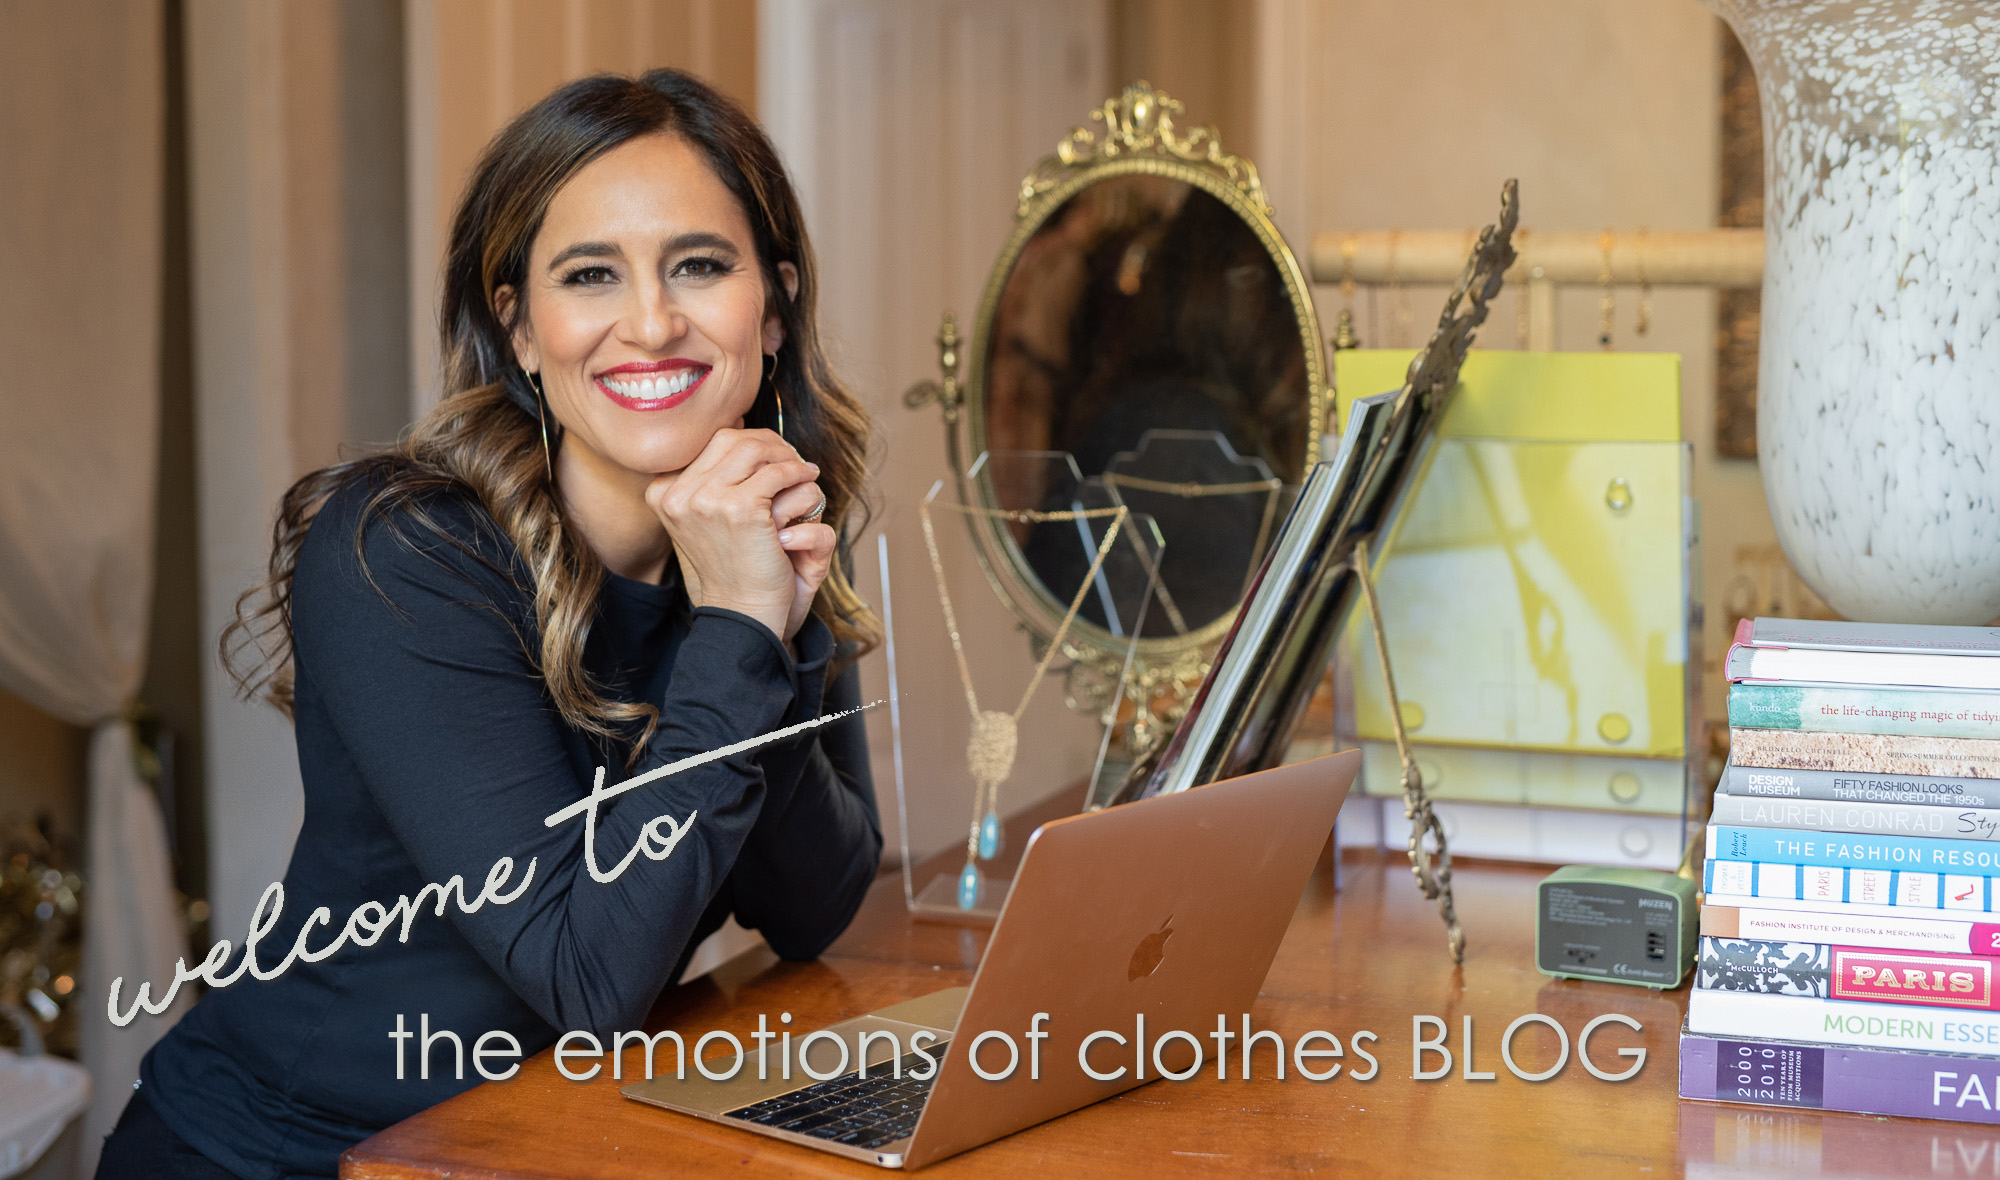 Christine Vartanian wearing a black long sleeved shirt, sitting at a wooden table in front of a laptop with a gold mirror, folders and stack of books on the table, smiling at the camera, with the text "welcome to the emotions of clothes BLOG"